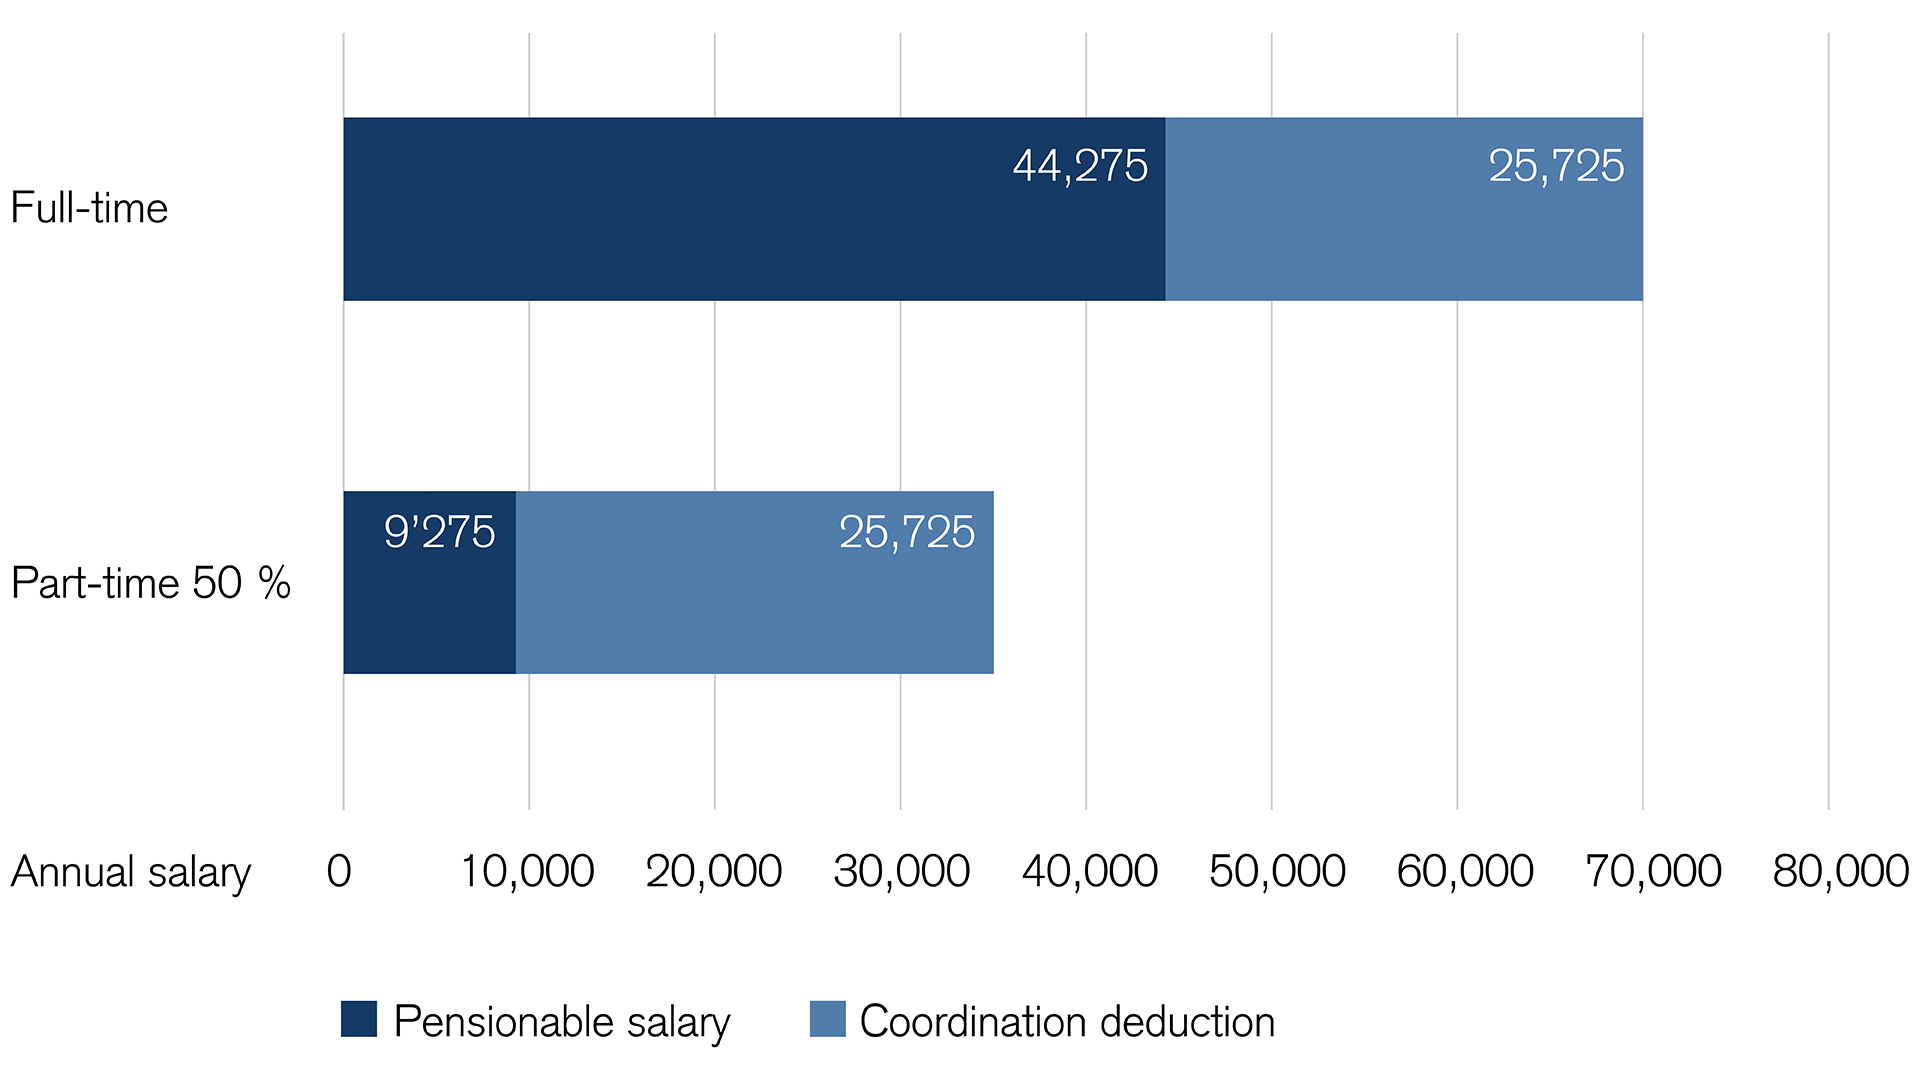 Repercussions of the coordination deduction – full-time versus part-time